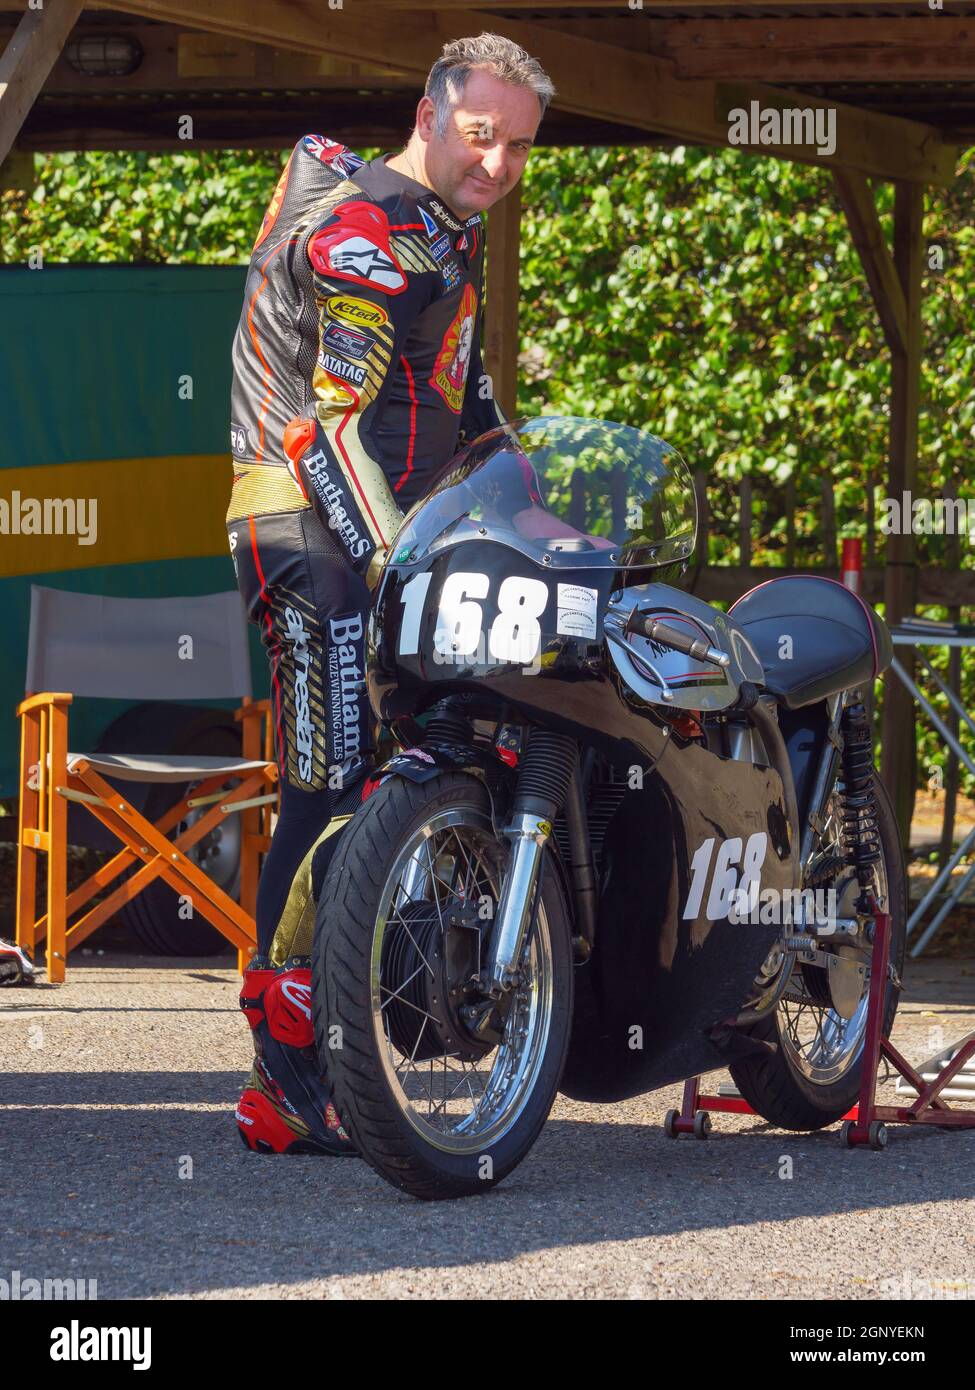 Michael Rutter motorbike rider at the Goodwood Revival 2021 Stock Photo